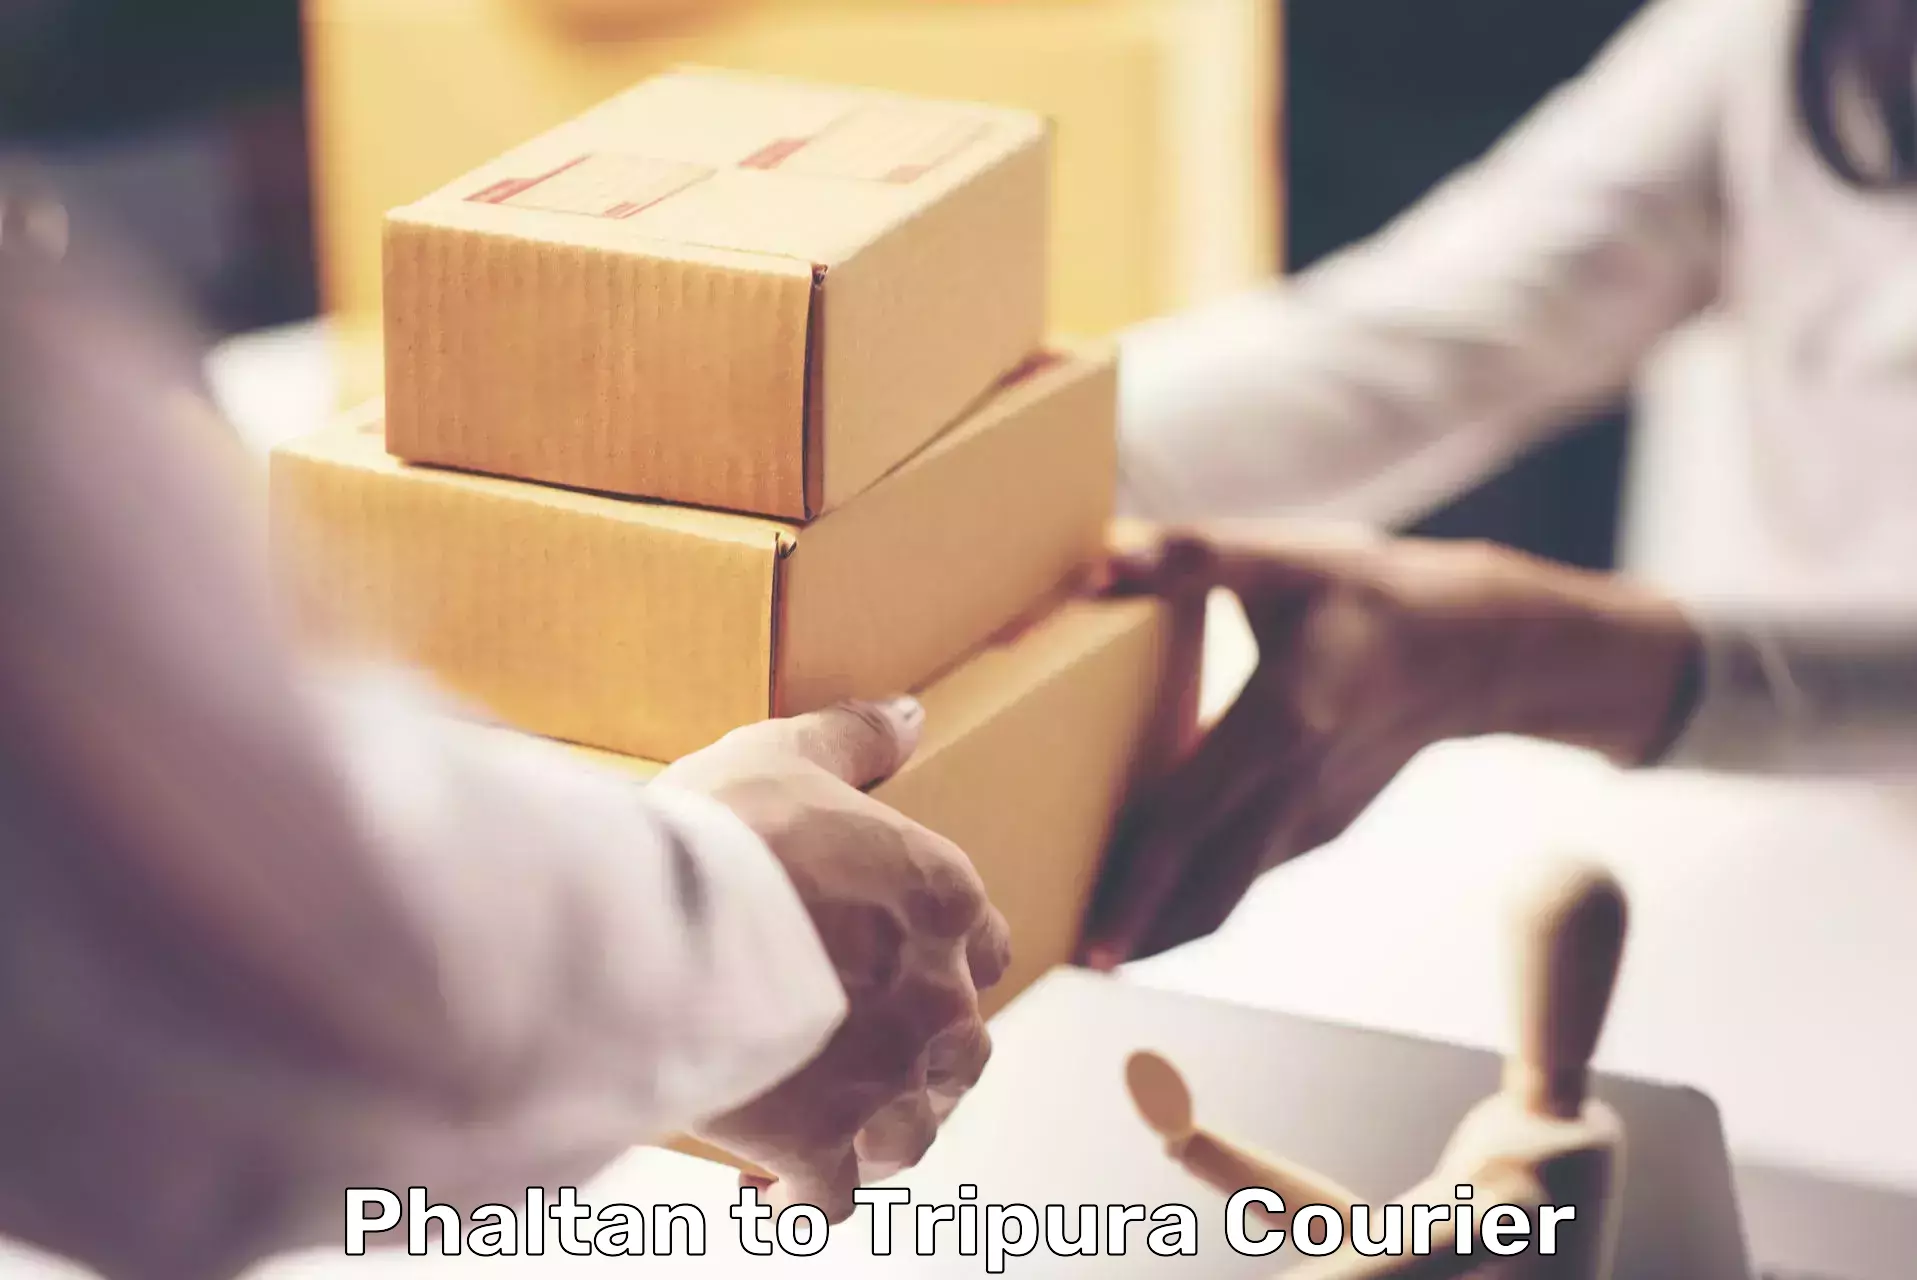 Pharmaceutical courier Phaltan to Manughat